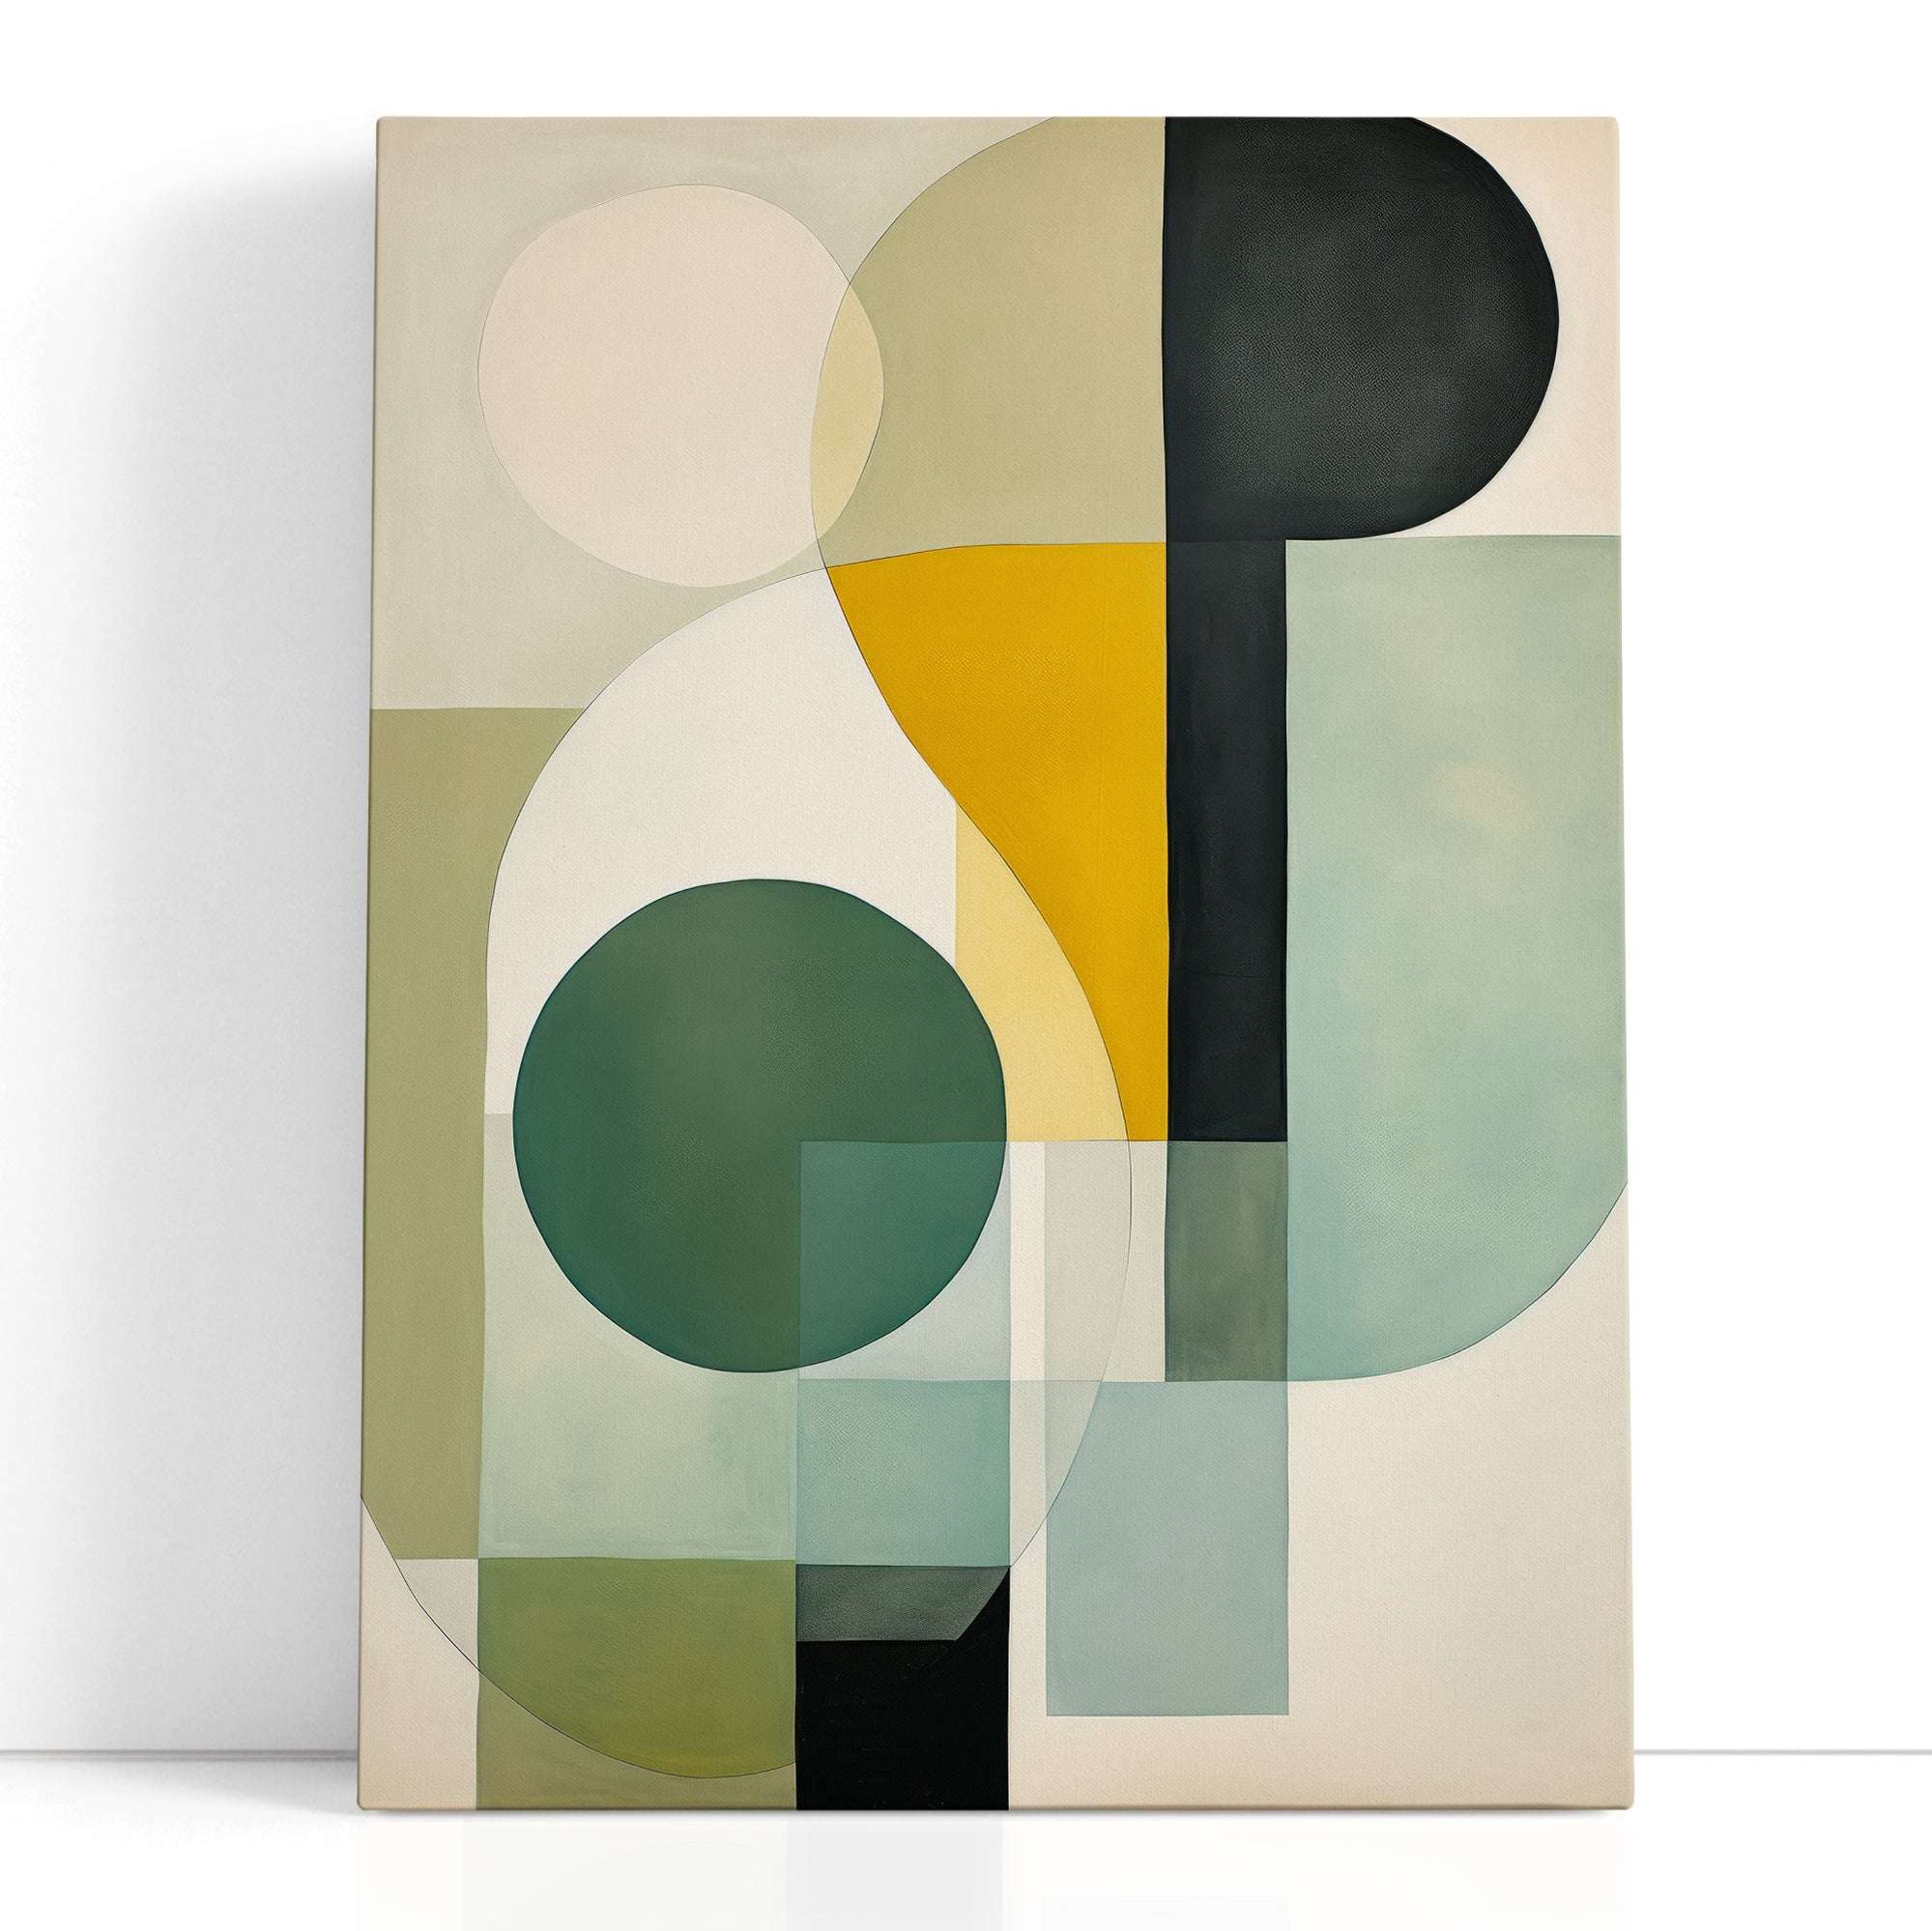 Muted Palette of Green, Yellow, and Black - Canvas Print - Artoholica Ready to Hang Canvas Print